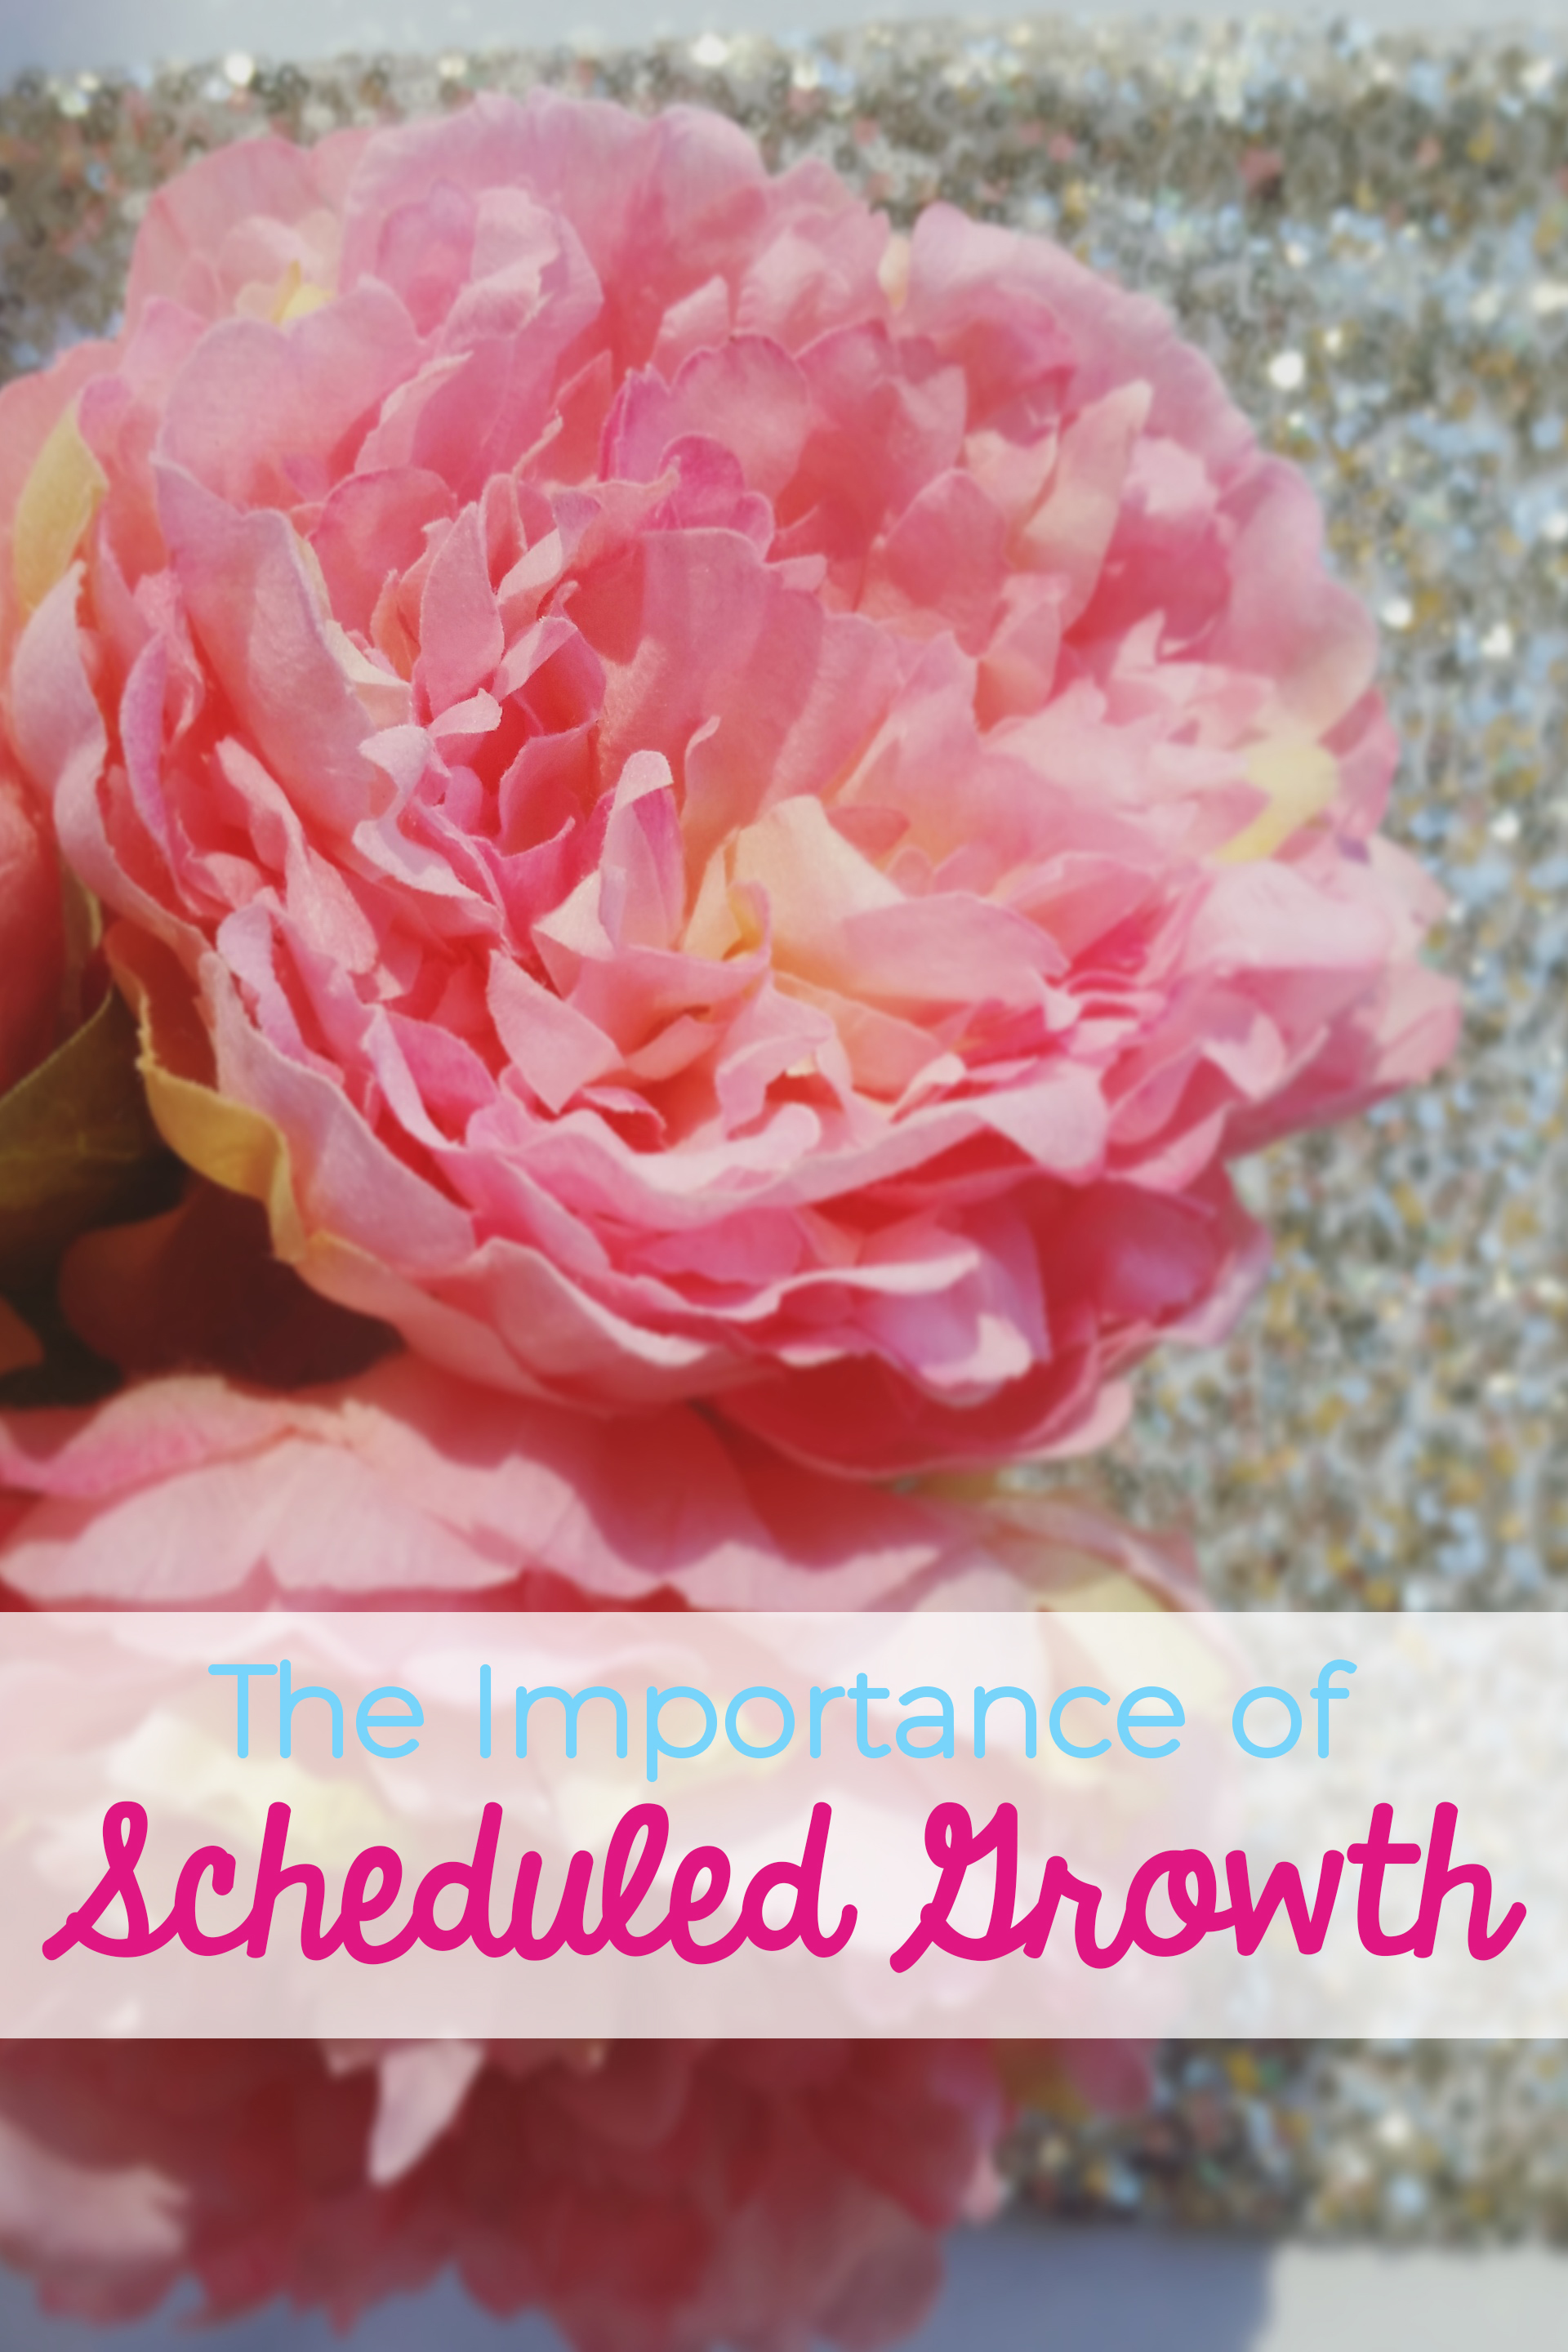 Scheduling opportunities to grow, regardless of your industry, niche, or lifestyle, is incredibly important. Here's why that time for peace, renewal, and growth is so important.